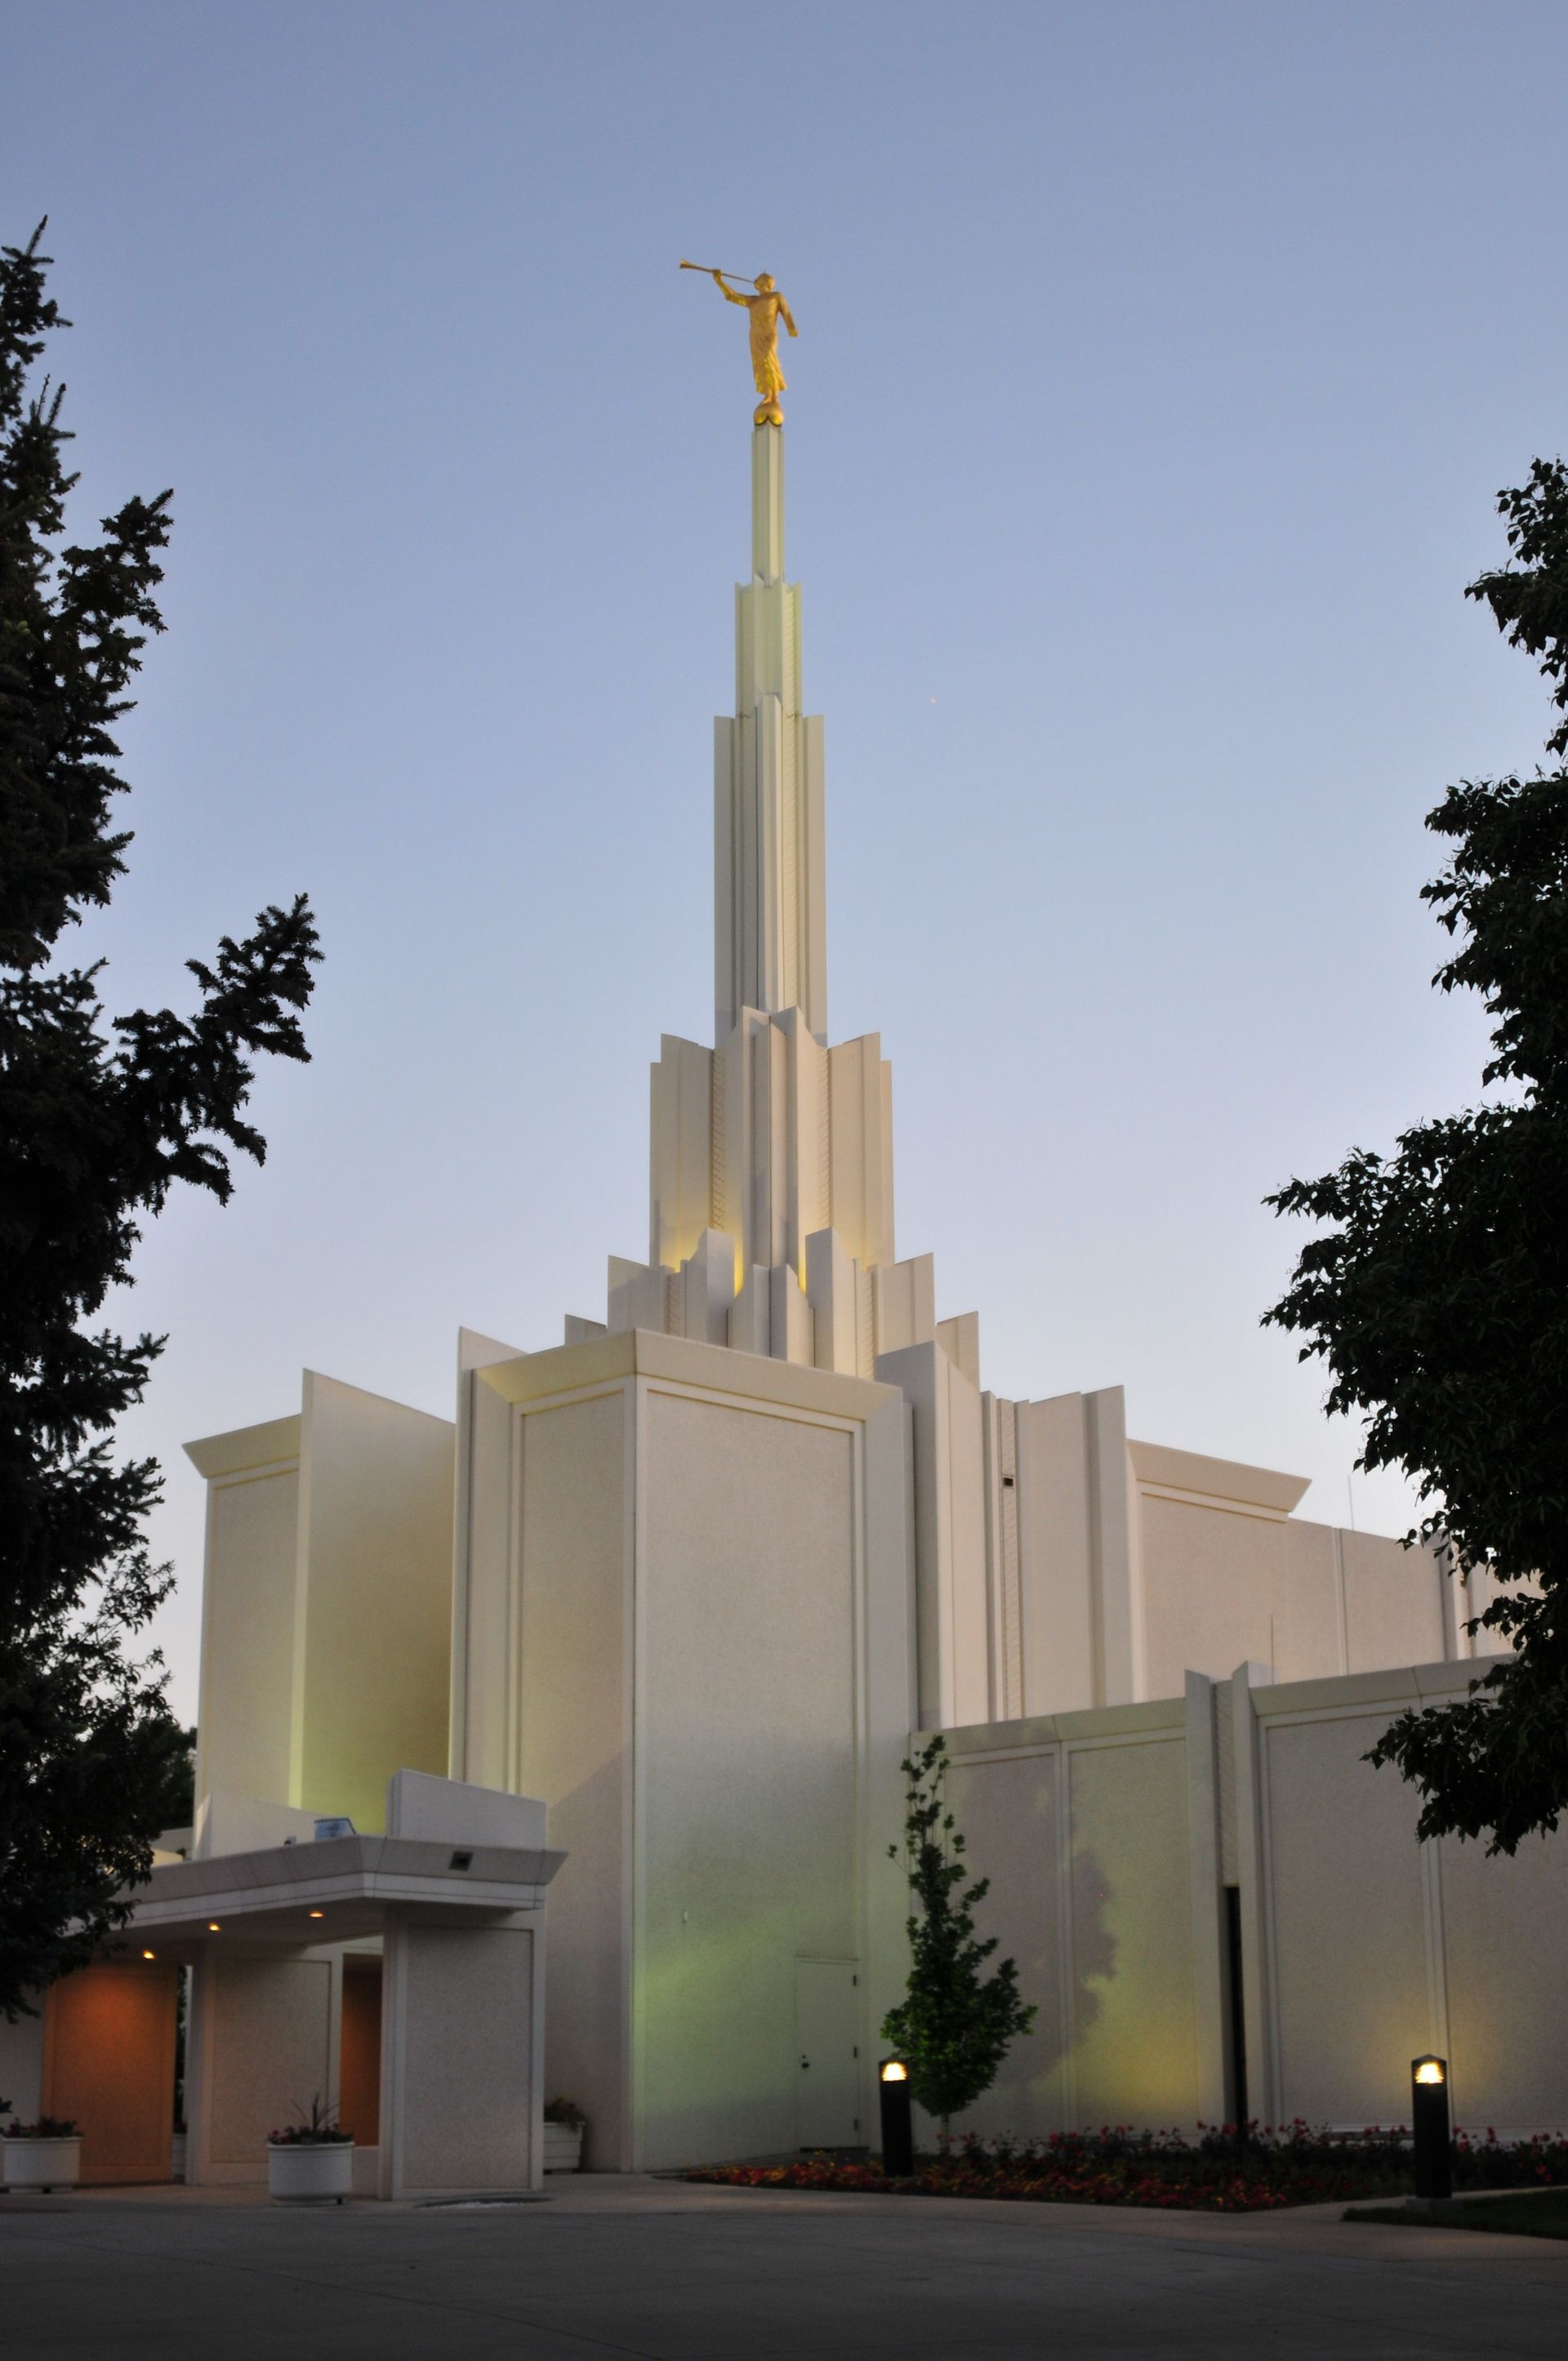 A portrait view of the Denver Colorado Temple lit up at night.